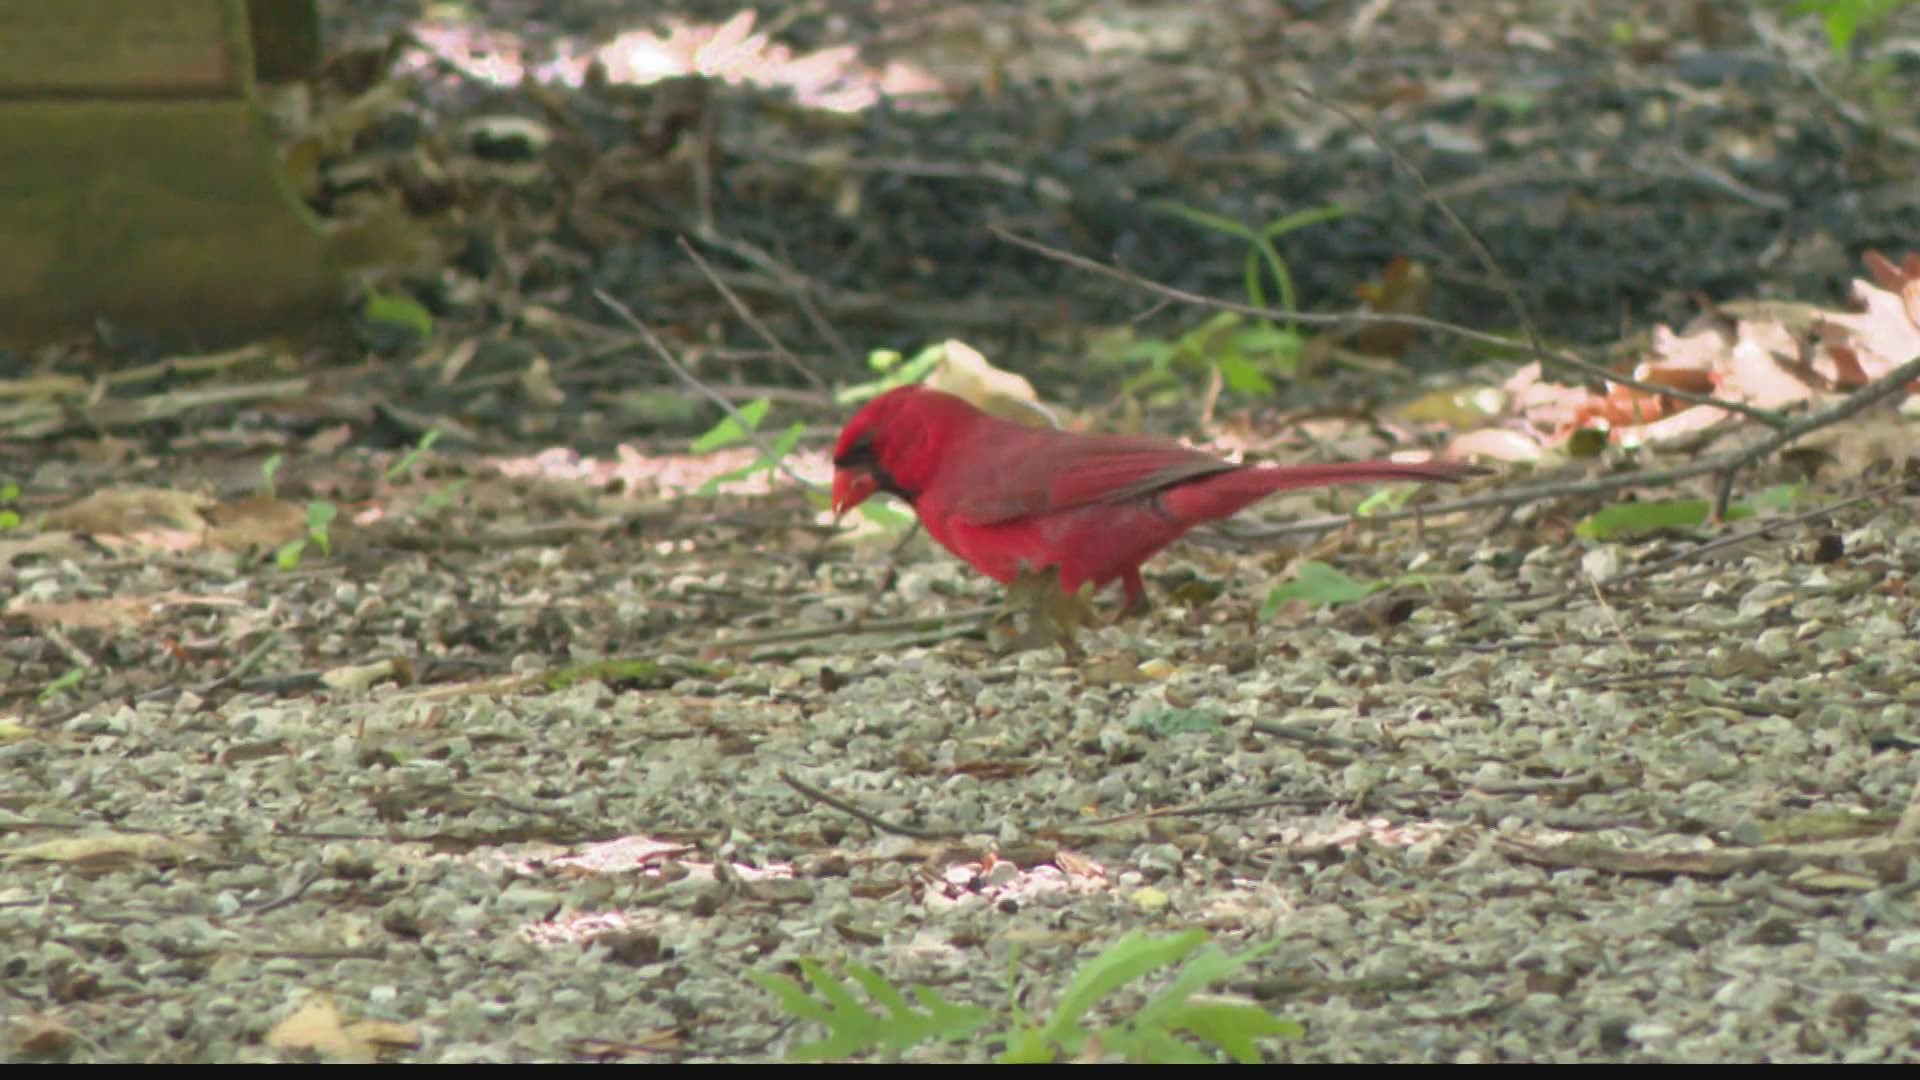 Indiana DNR has asked Hoosiers to take down their bird feeders and clean them as they investigate the mysterious deaths of songbirds across the state.